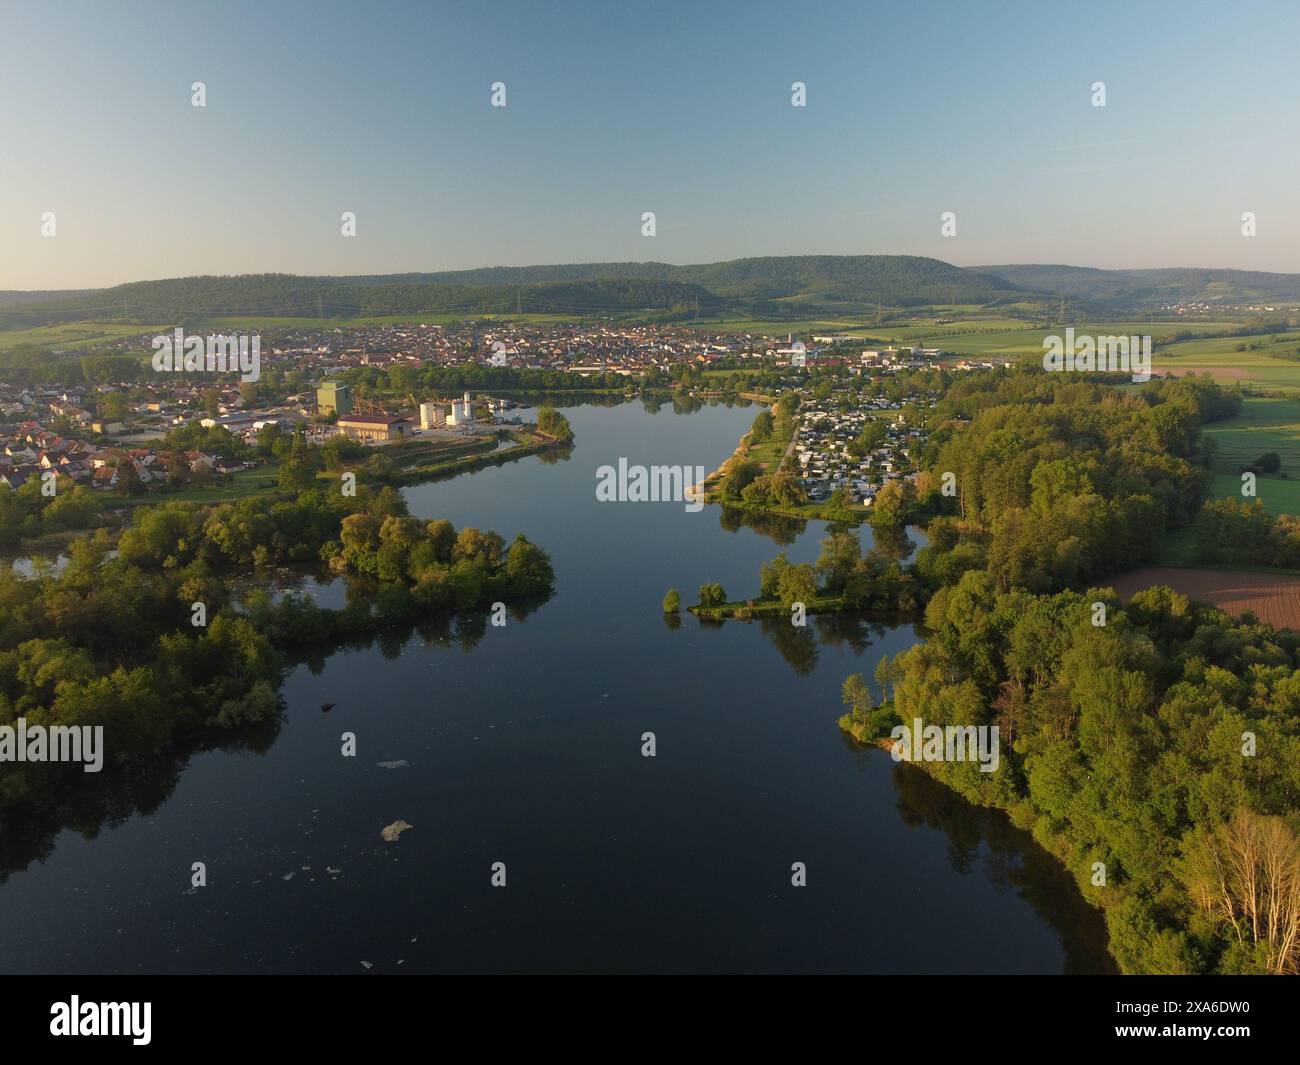 An aerial view of the Main River in Bavaria, Germany Stock Photo